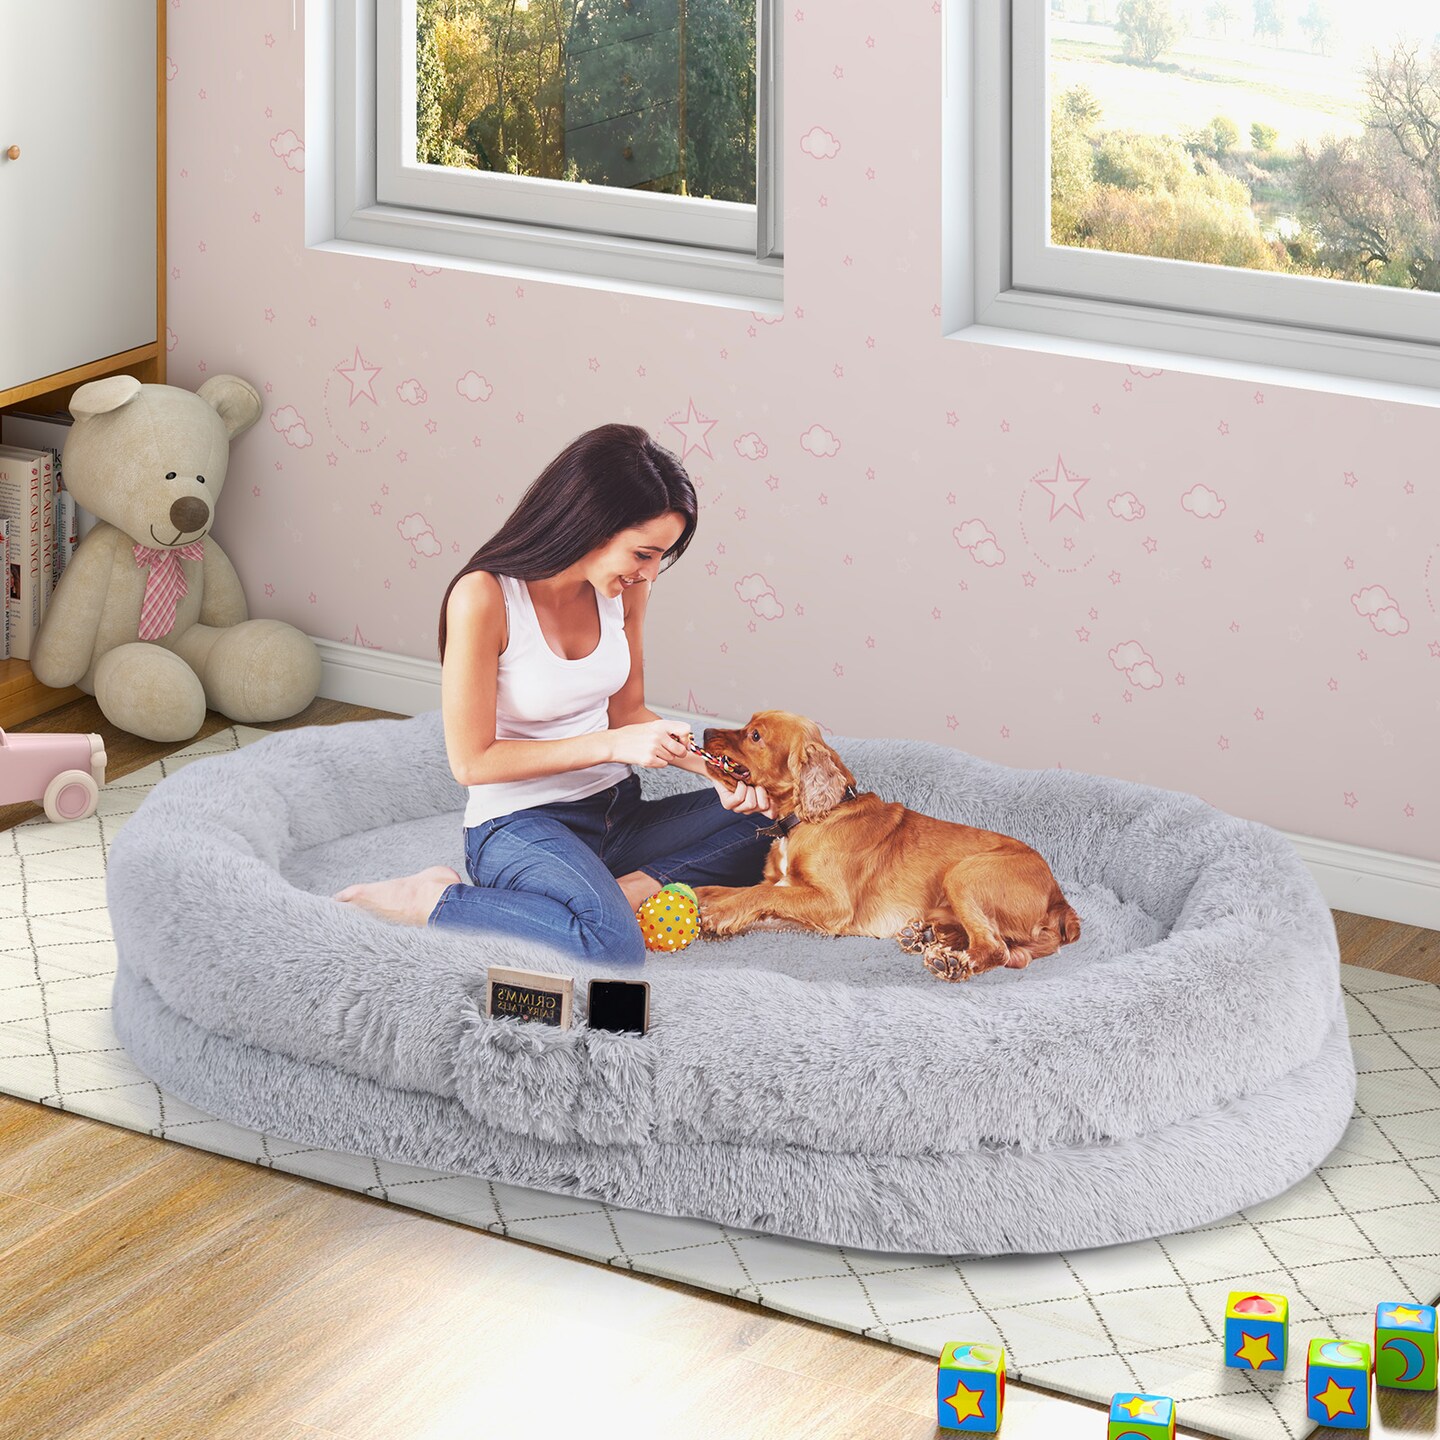 Washable Fluffy Human Dog Bed with Soft Blanket and Plump Pillow - 68" x 46" x 10" (L x W x H)